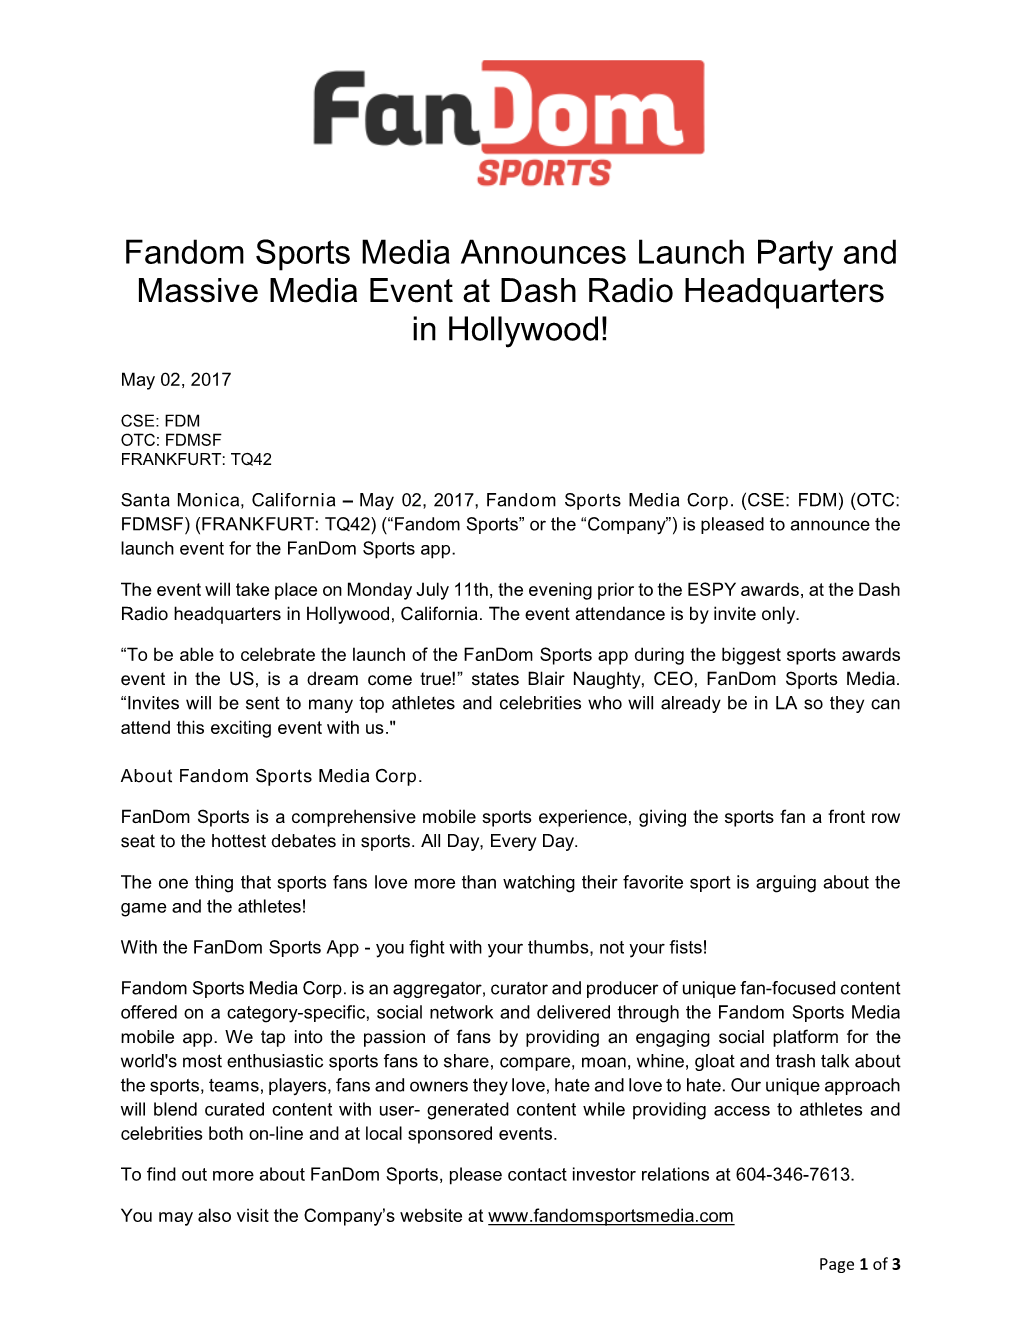 Fandom Sports Media Announces Launch Party and Massive Media Event at Dash Radio Headquarters in Hollywood!